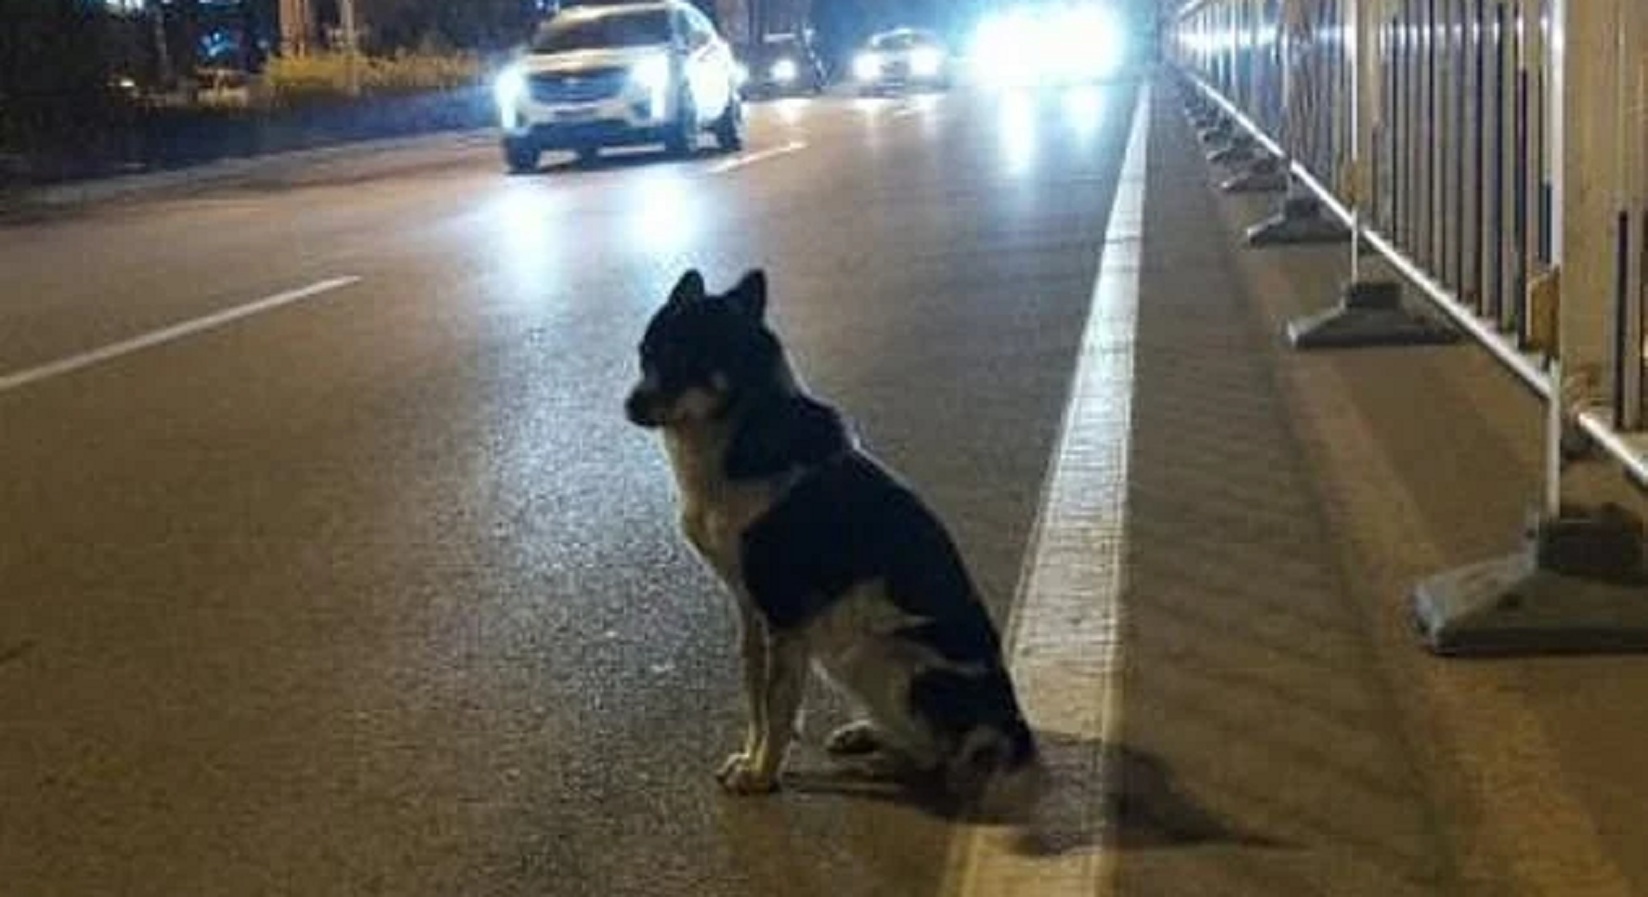 This Dog Has Been Waiting For Its Owner For 80 Days, At The Same Spot Where He Died In An Accident